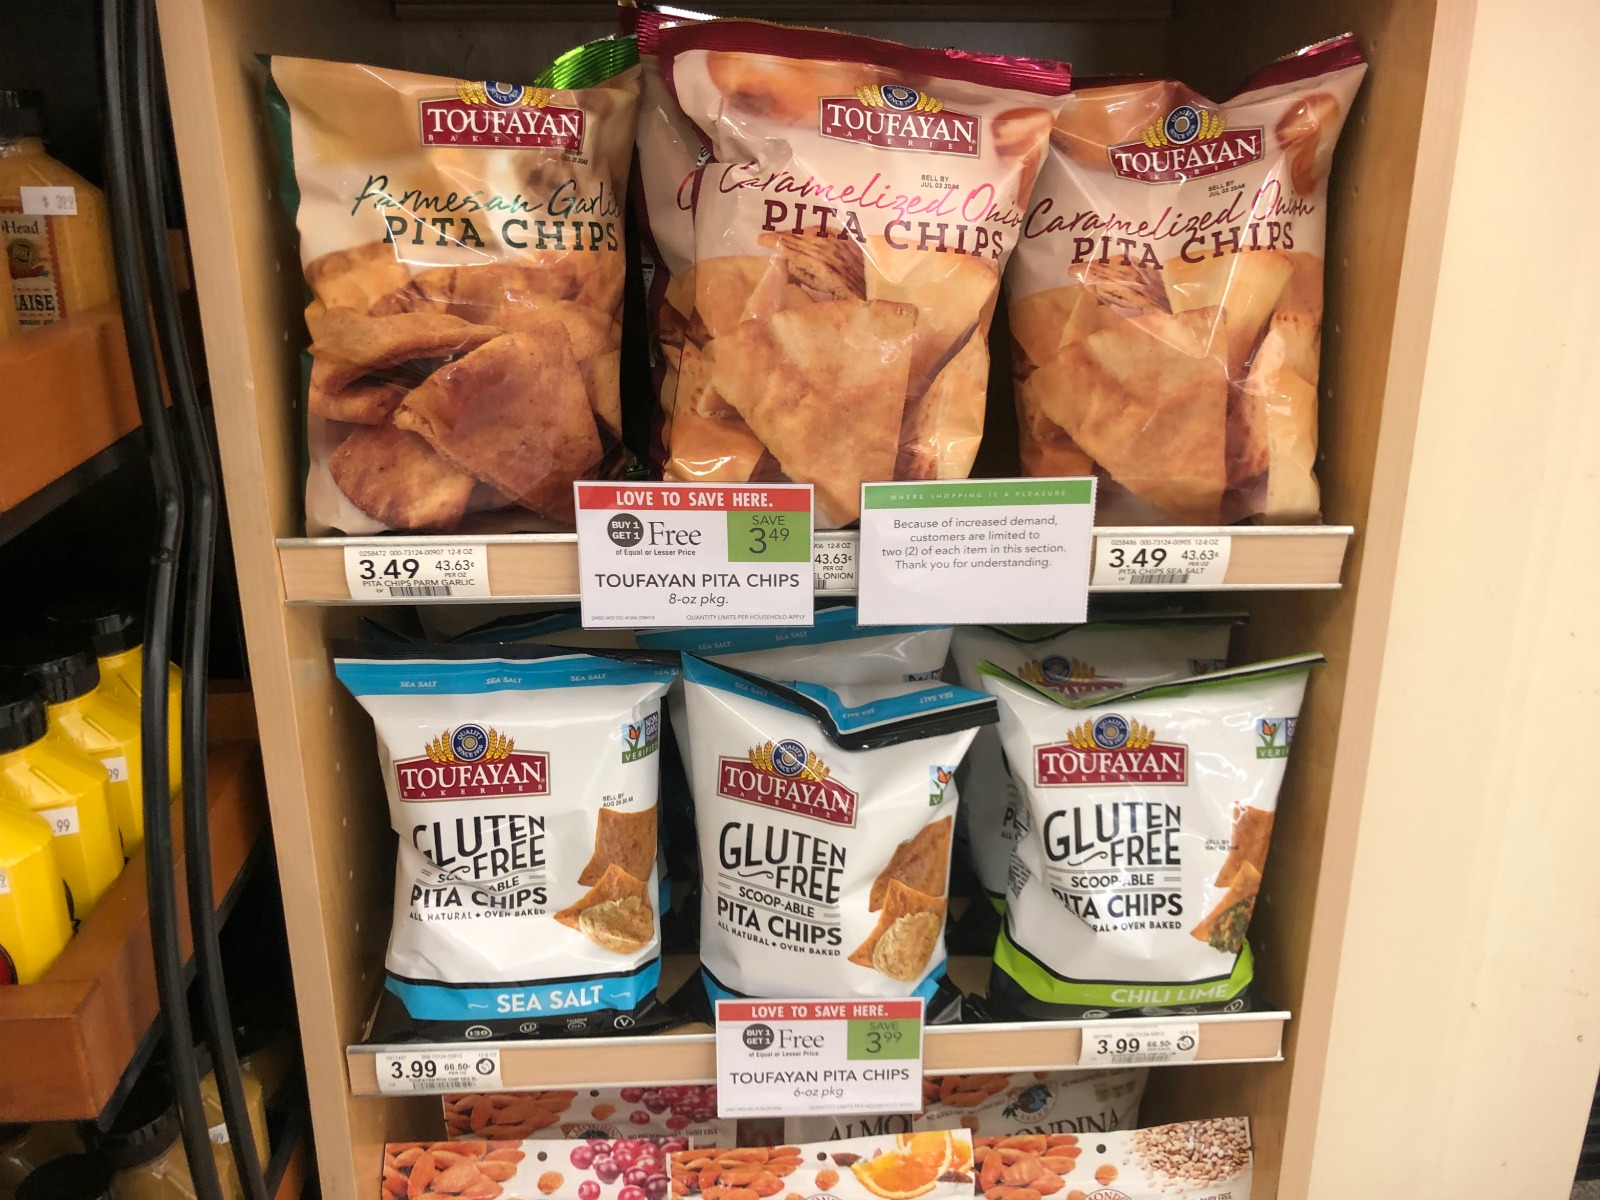 ALL Toufayan Pita Chips Are Buy One, Get One FREE This Week At Publix (Regular & Gluten Free!) on I Heart Publix